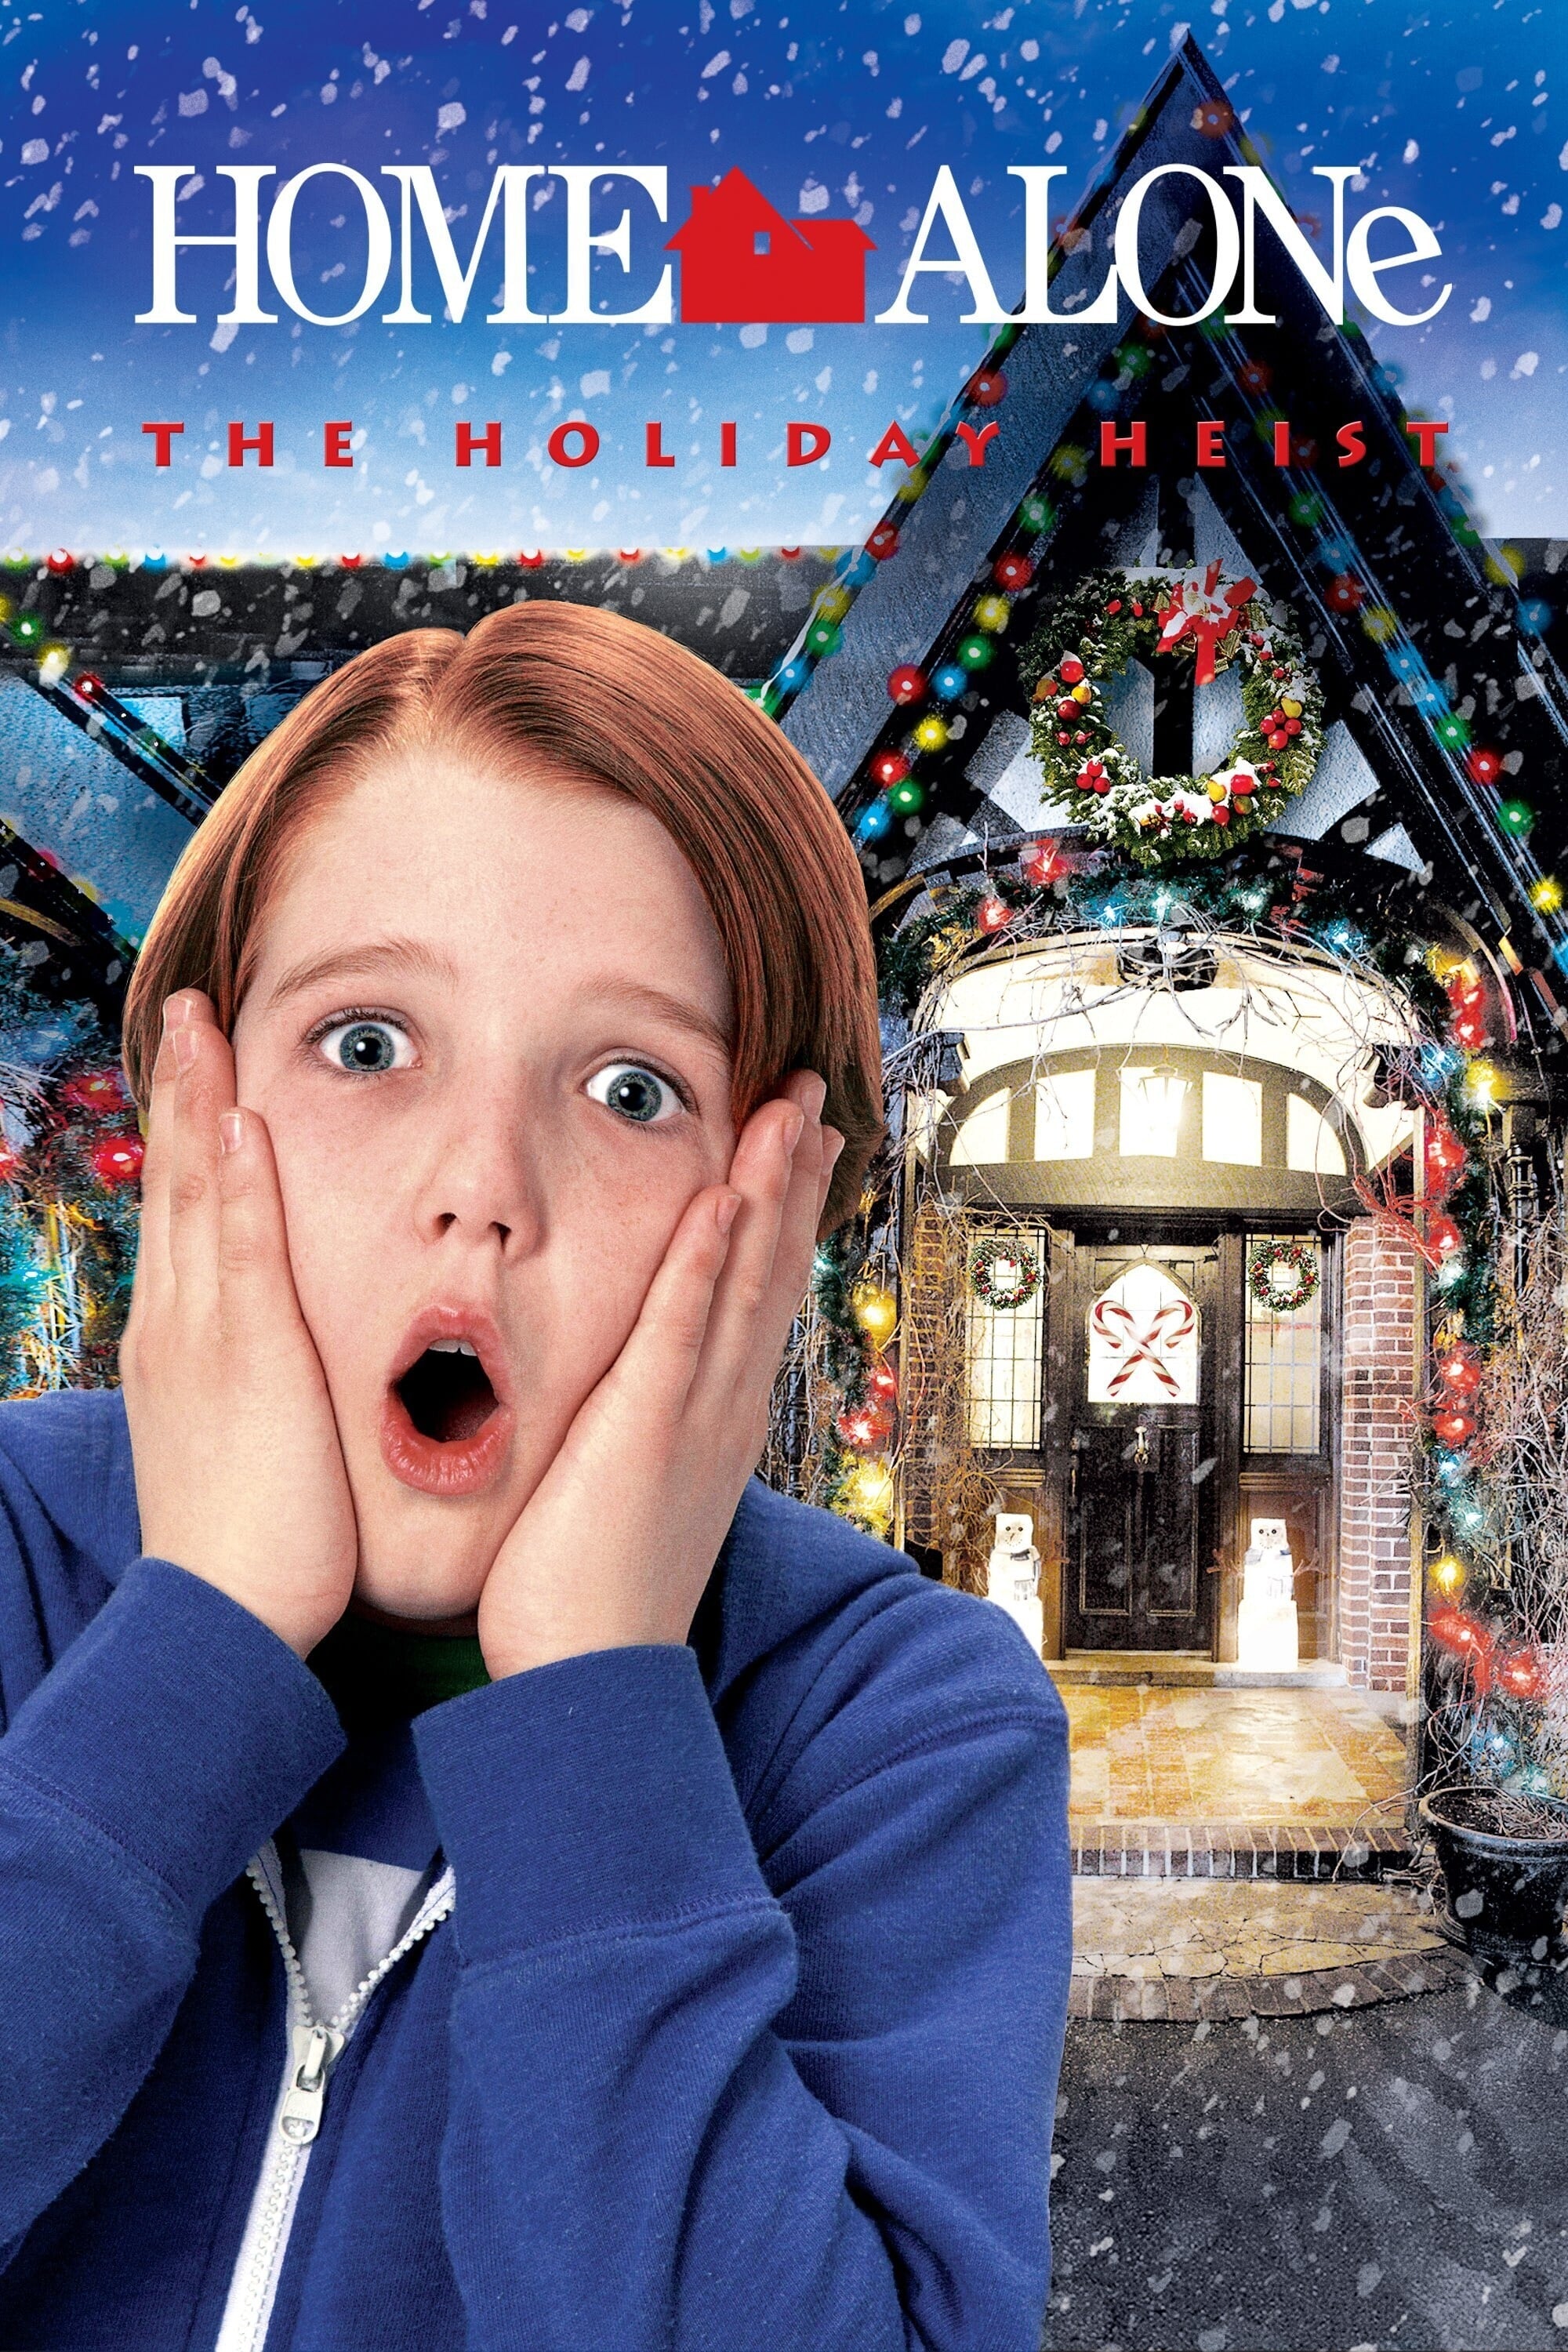 Home Alone The Holiday Heist Series9 Watch movies